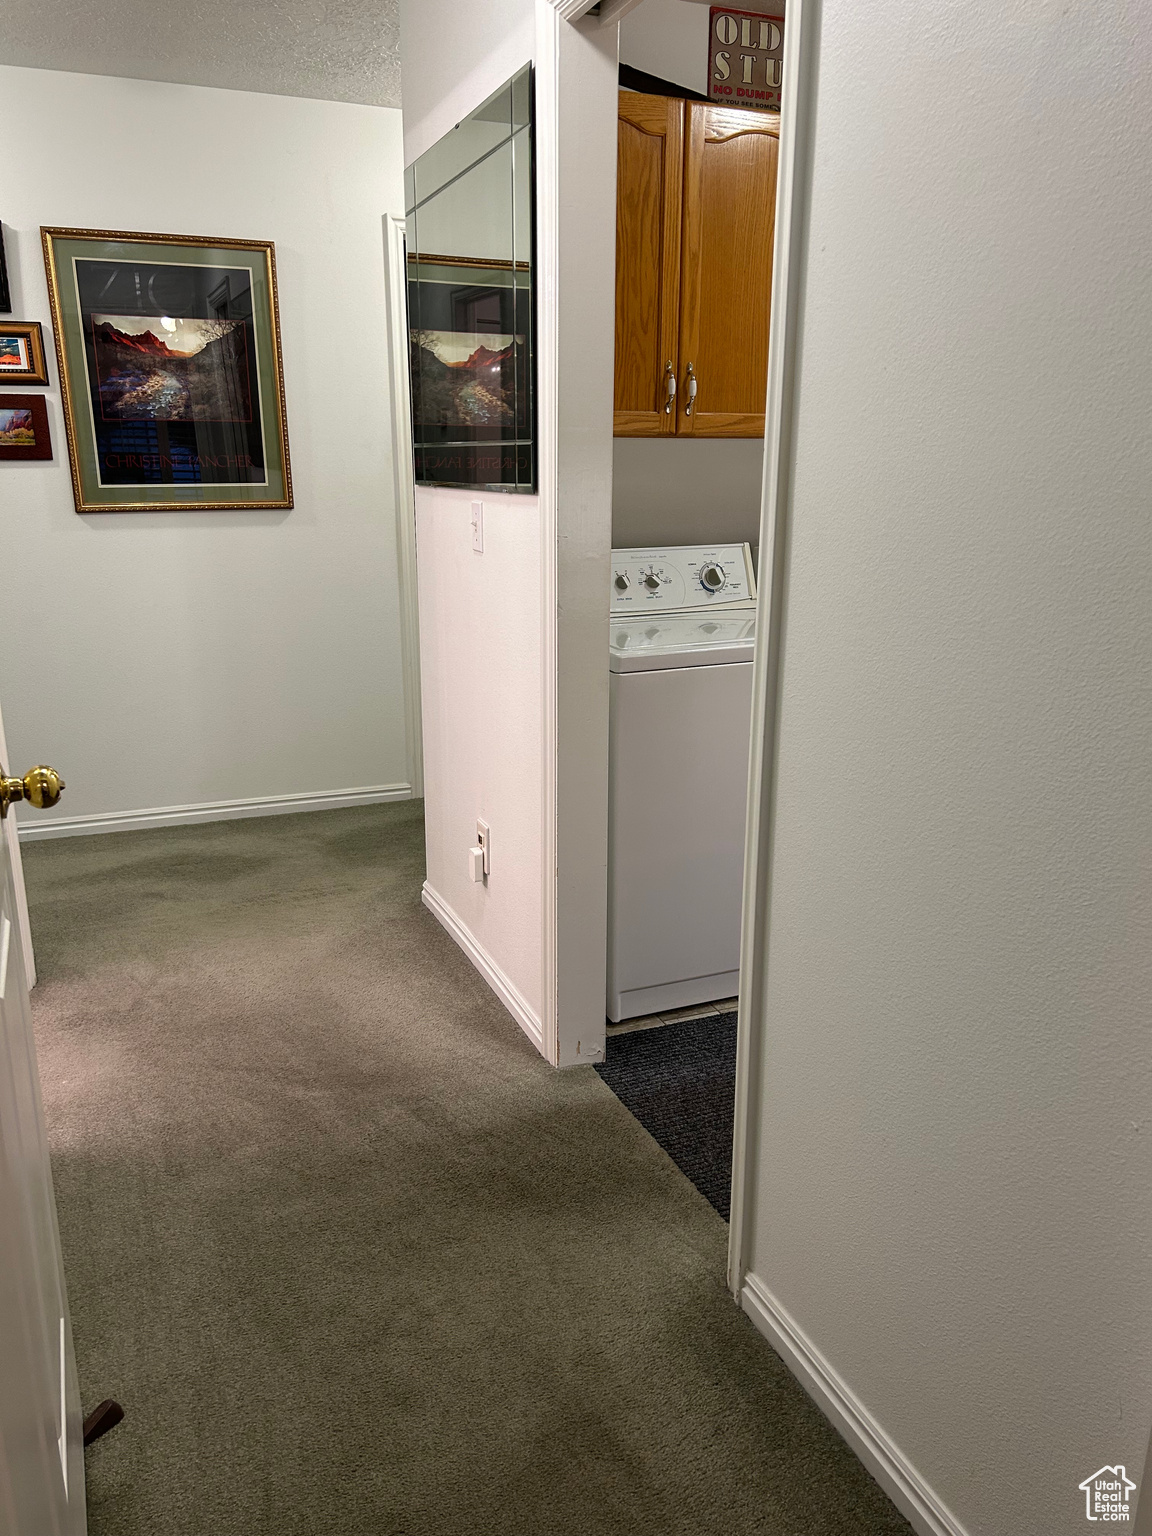 Corridor featuring a textured ceiling, dark carpet, and washer / dryer